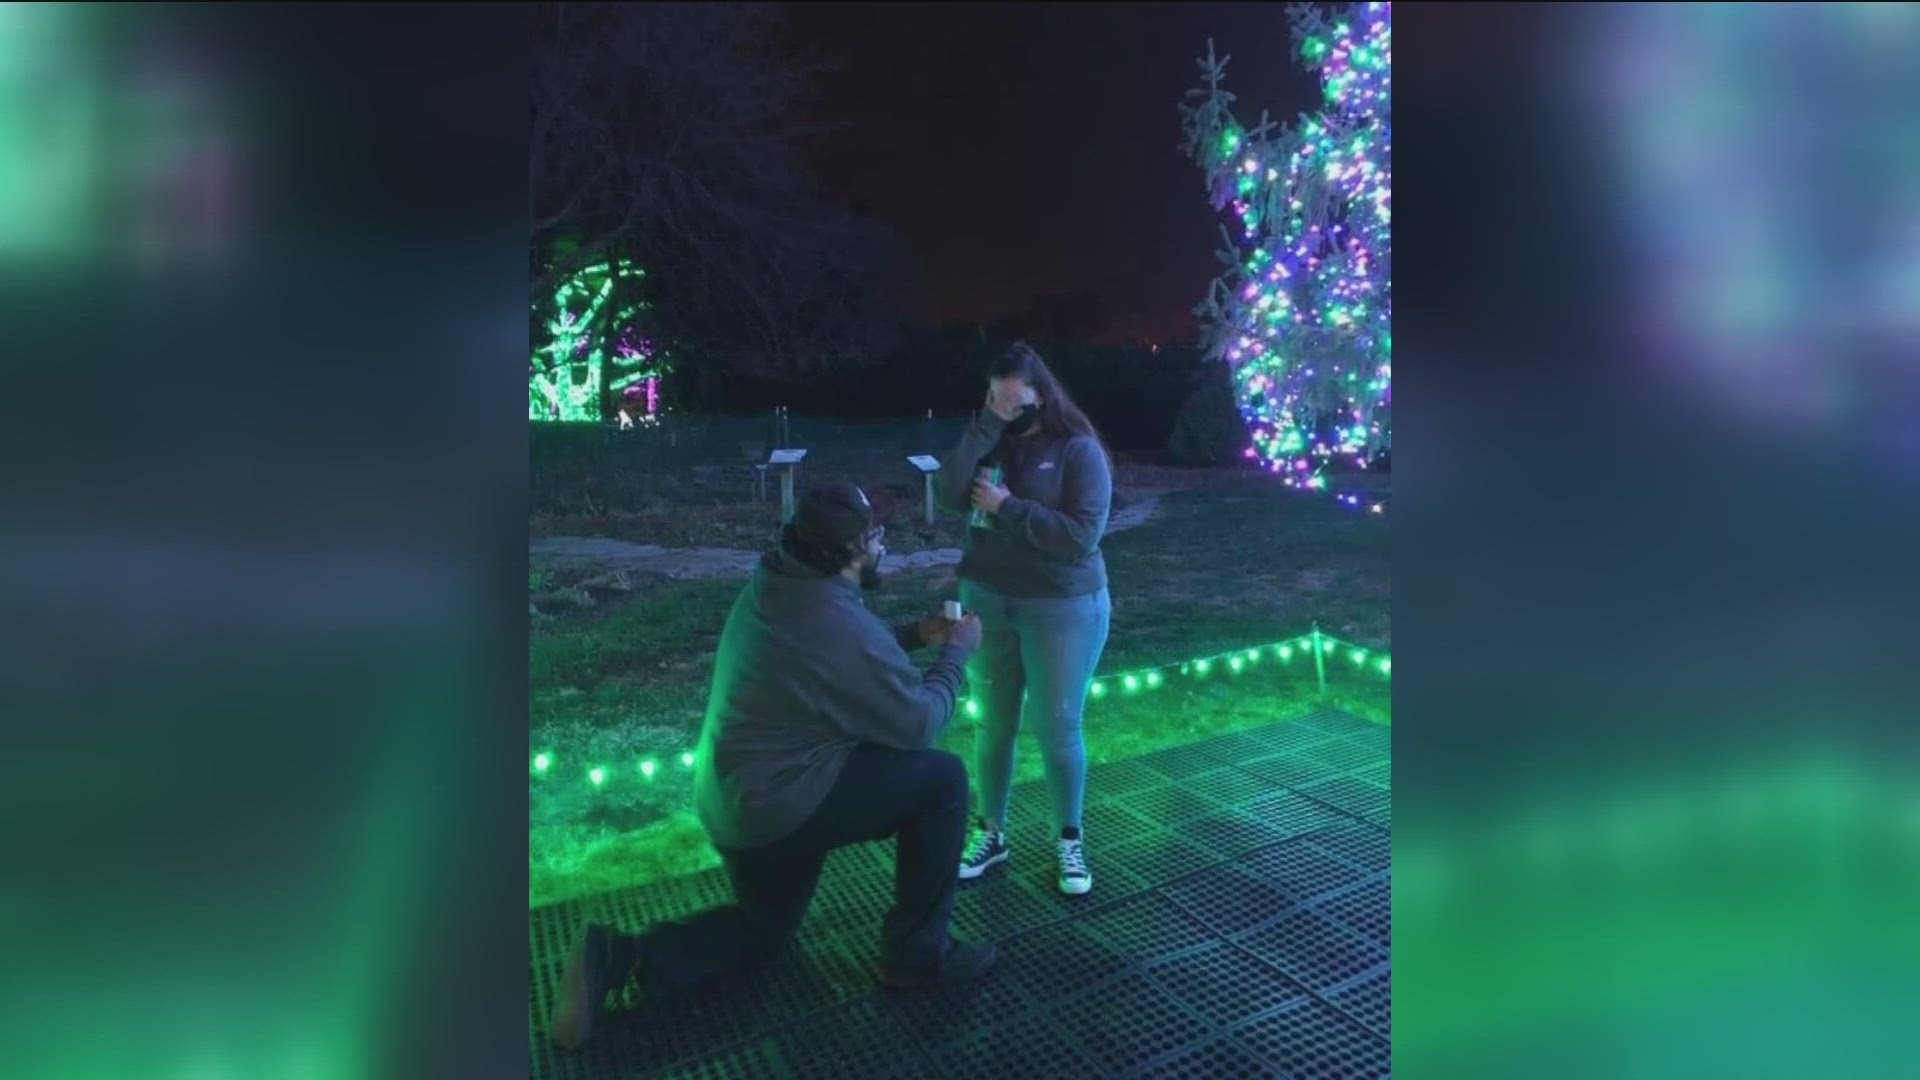 Meet just two of the many couples who have gotten engaged during Lights Before Christmas at the Toledo Zoo.